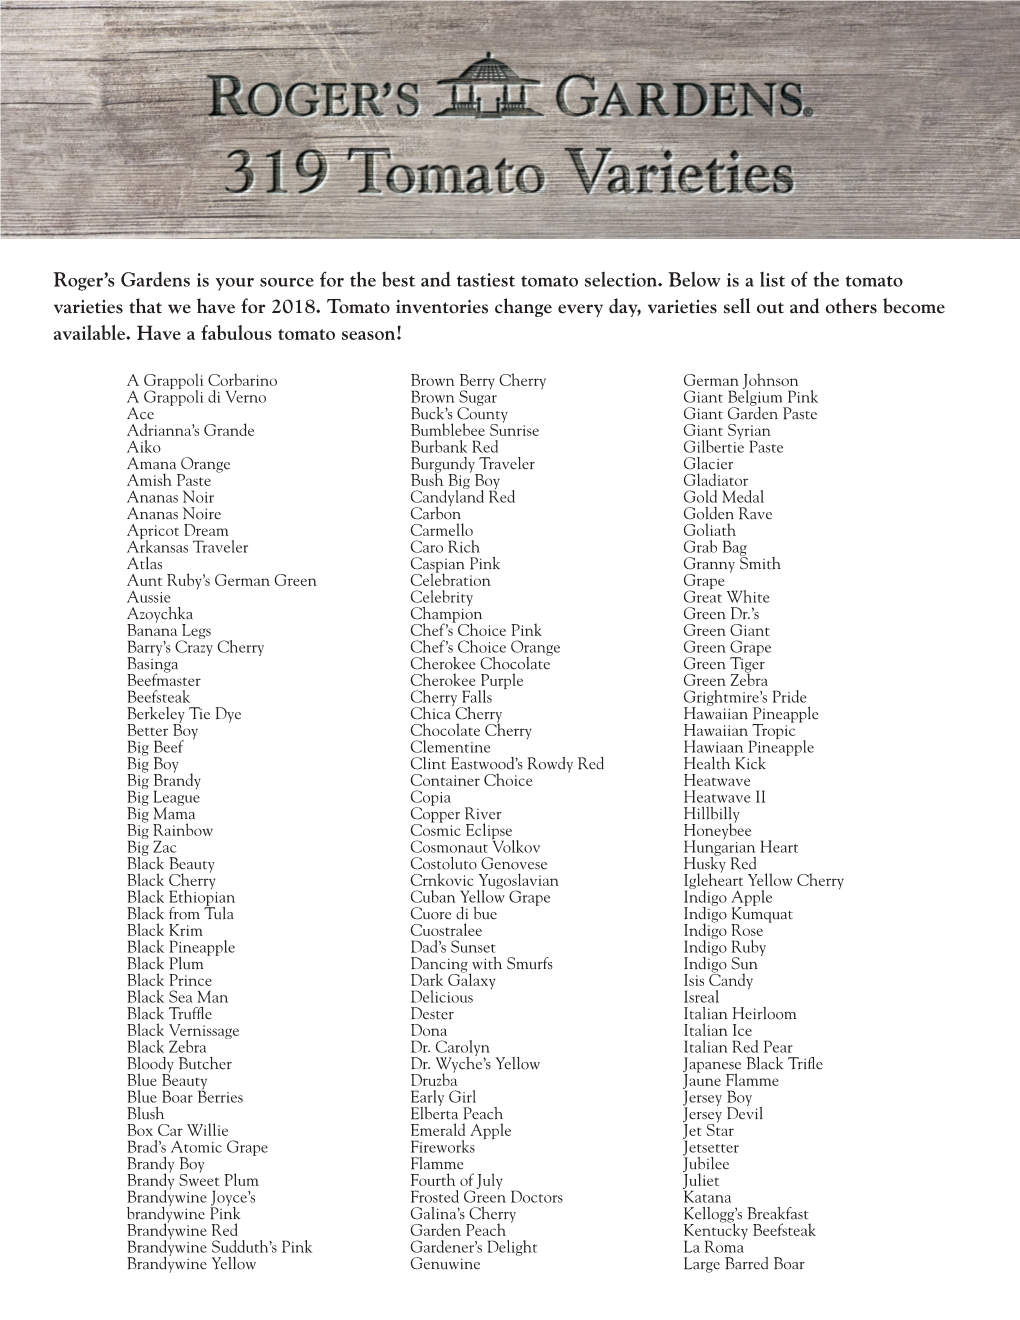 Roger's Gardens Is Your Source for the Best and Tastiest Tomato Selection